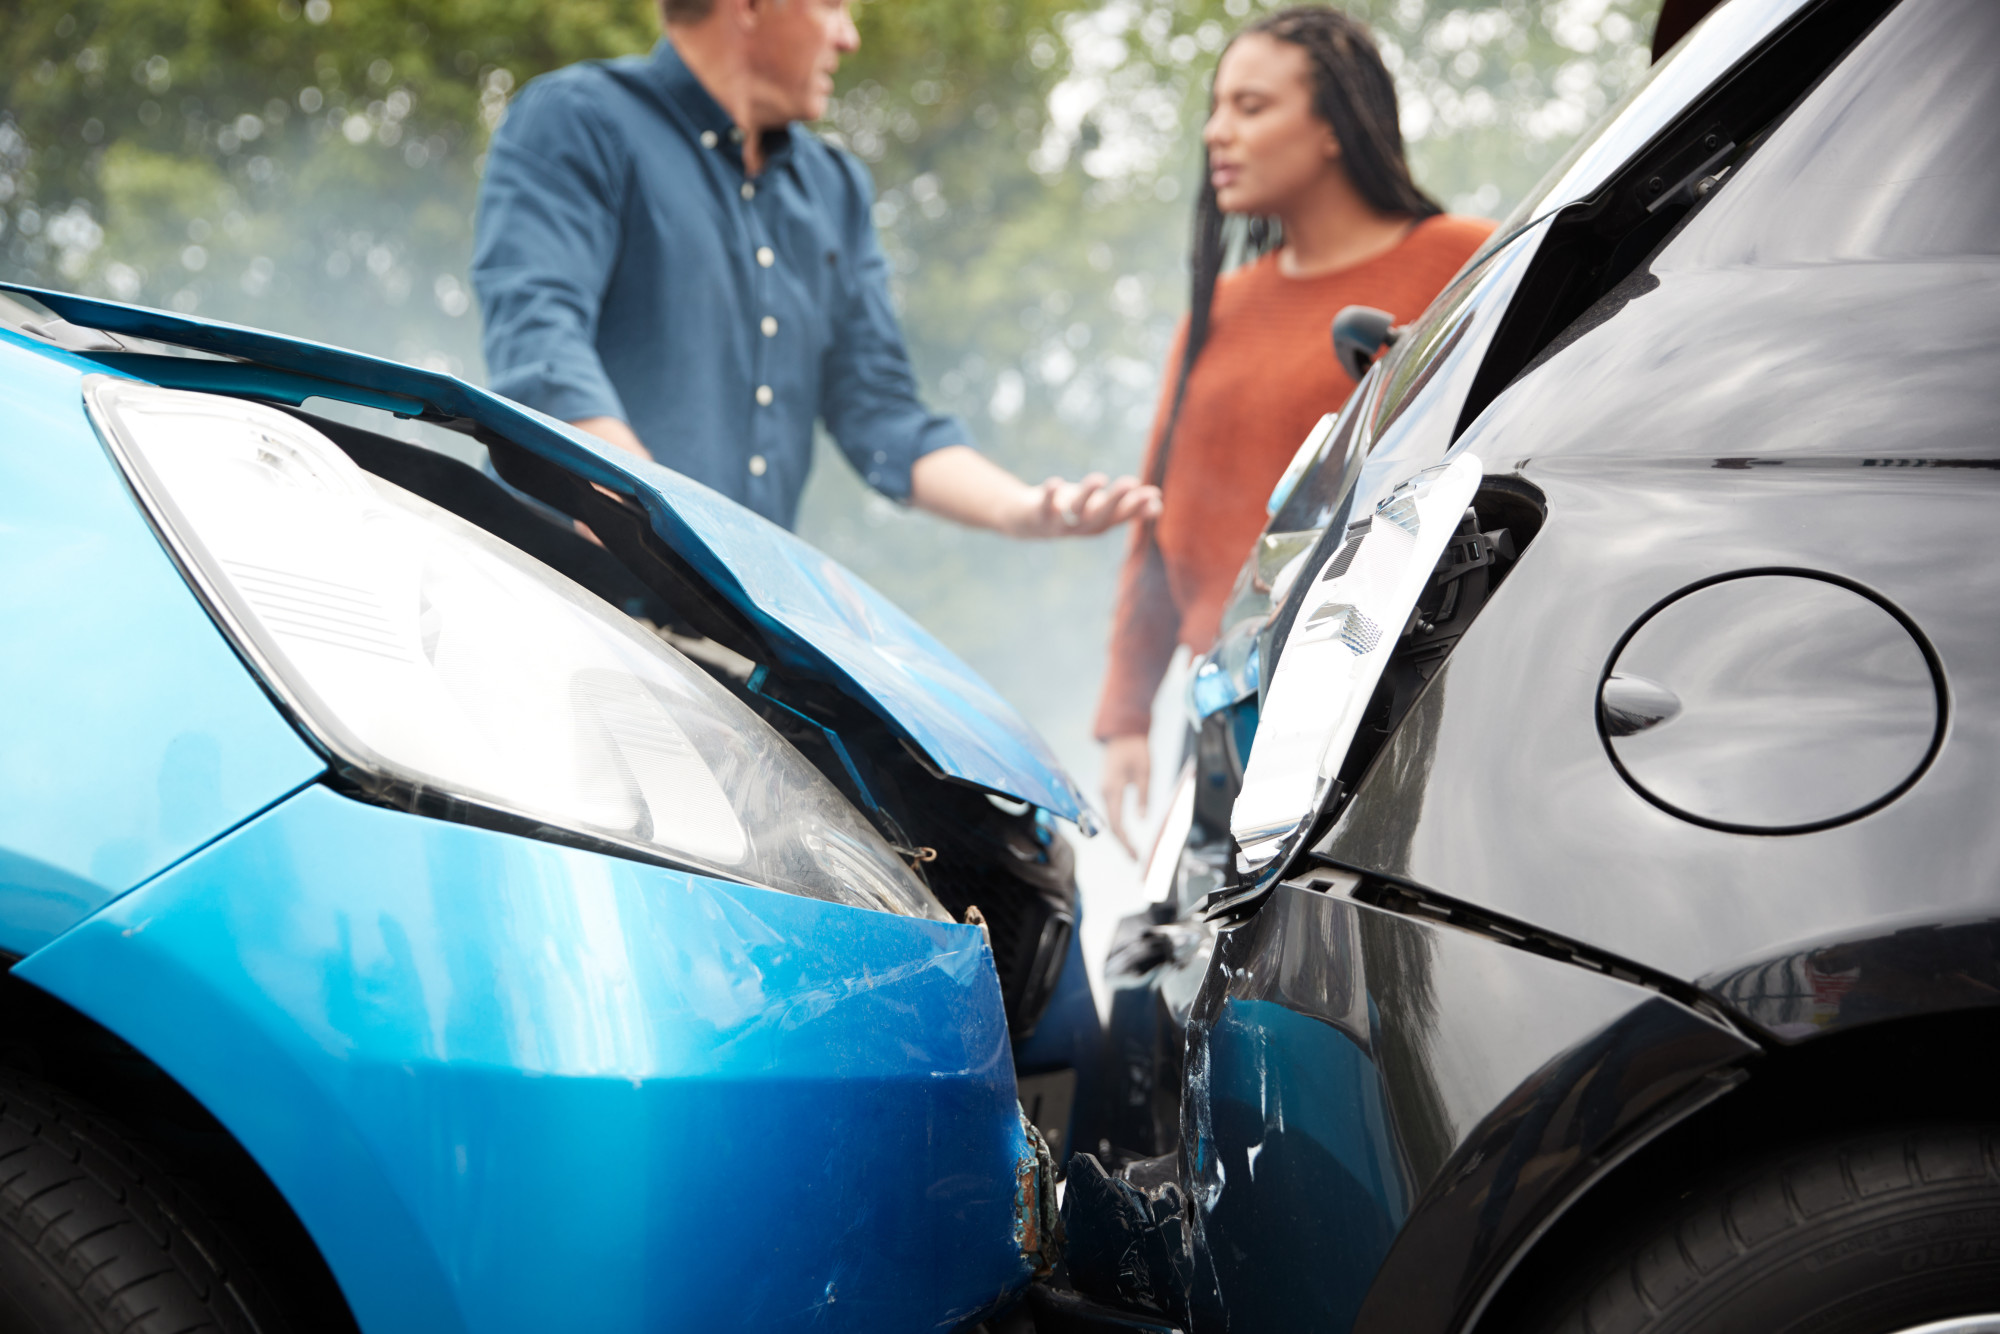 There are several types of car accidents that you need to avoid. Learn more about these crashes by checking out this guide.